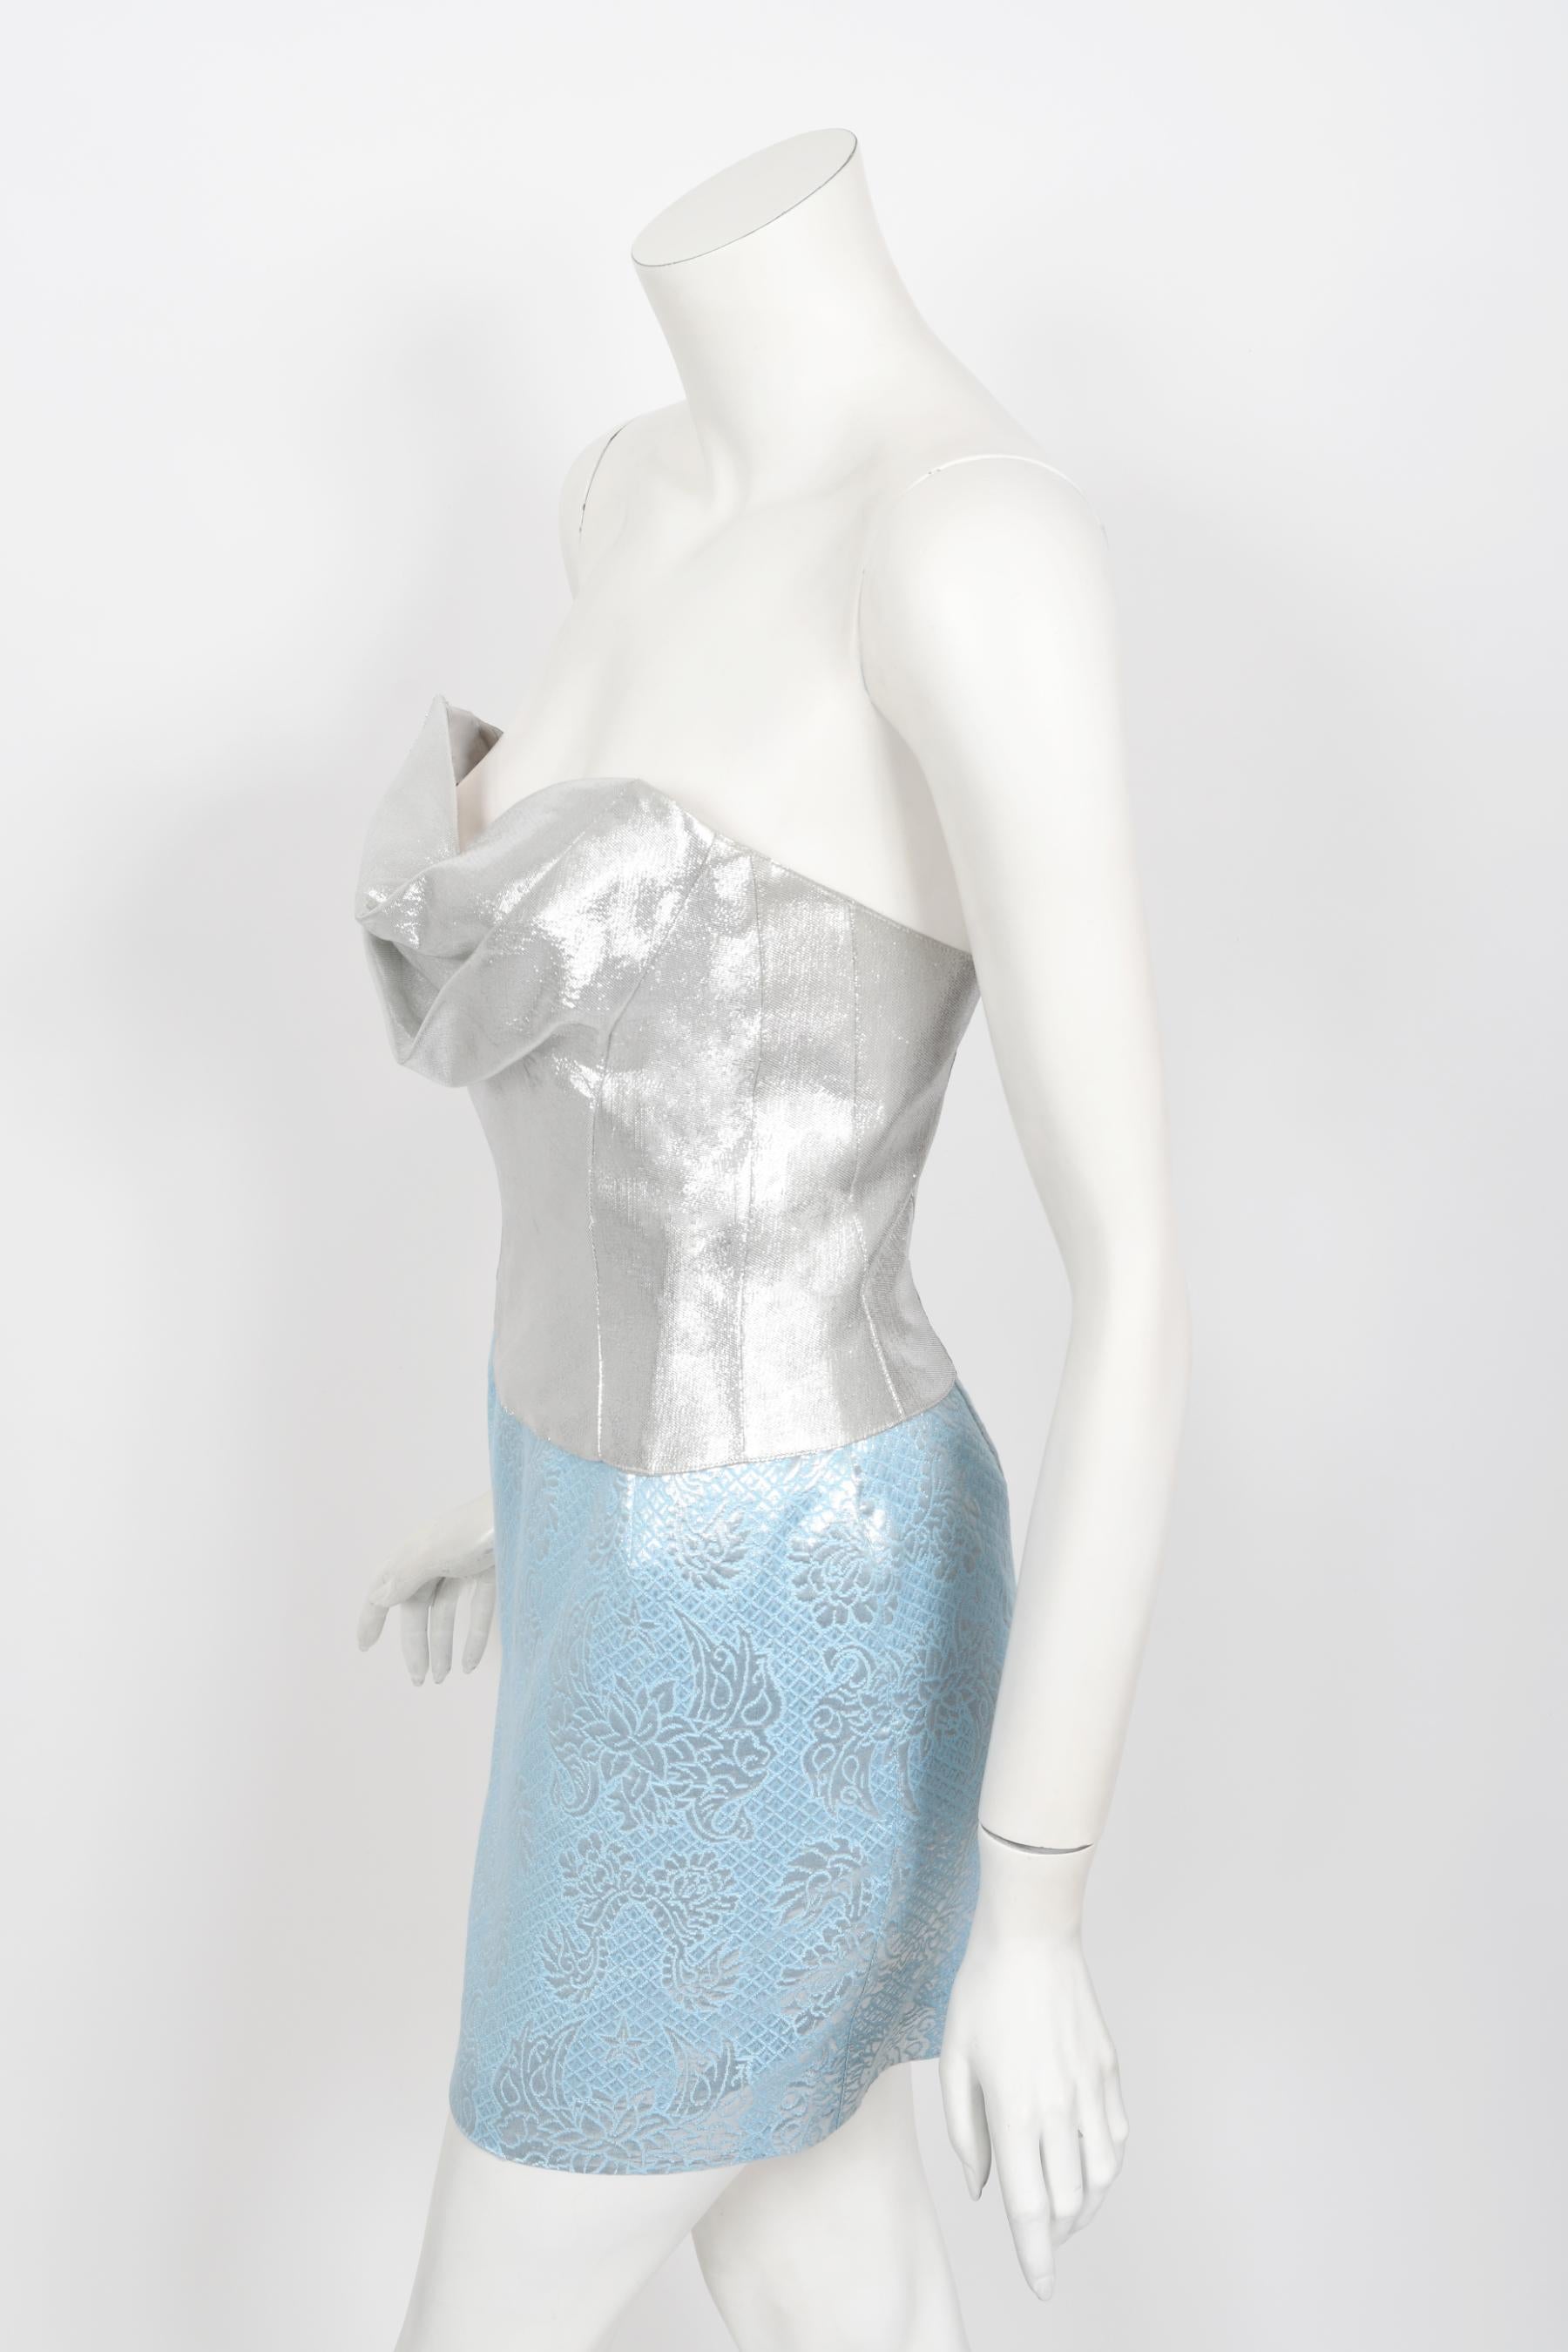 Iconic 1992 Thierry Mugler Couture Metallic Silver Blue Bustier Mini Skirt Suit In Good Condition For Sale In Beverly Hills, CA